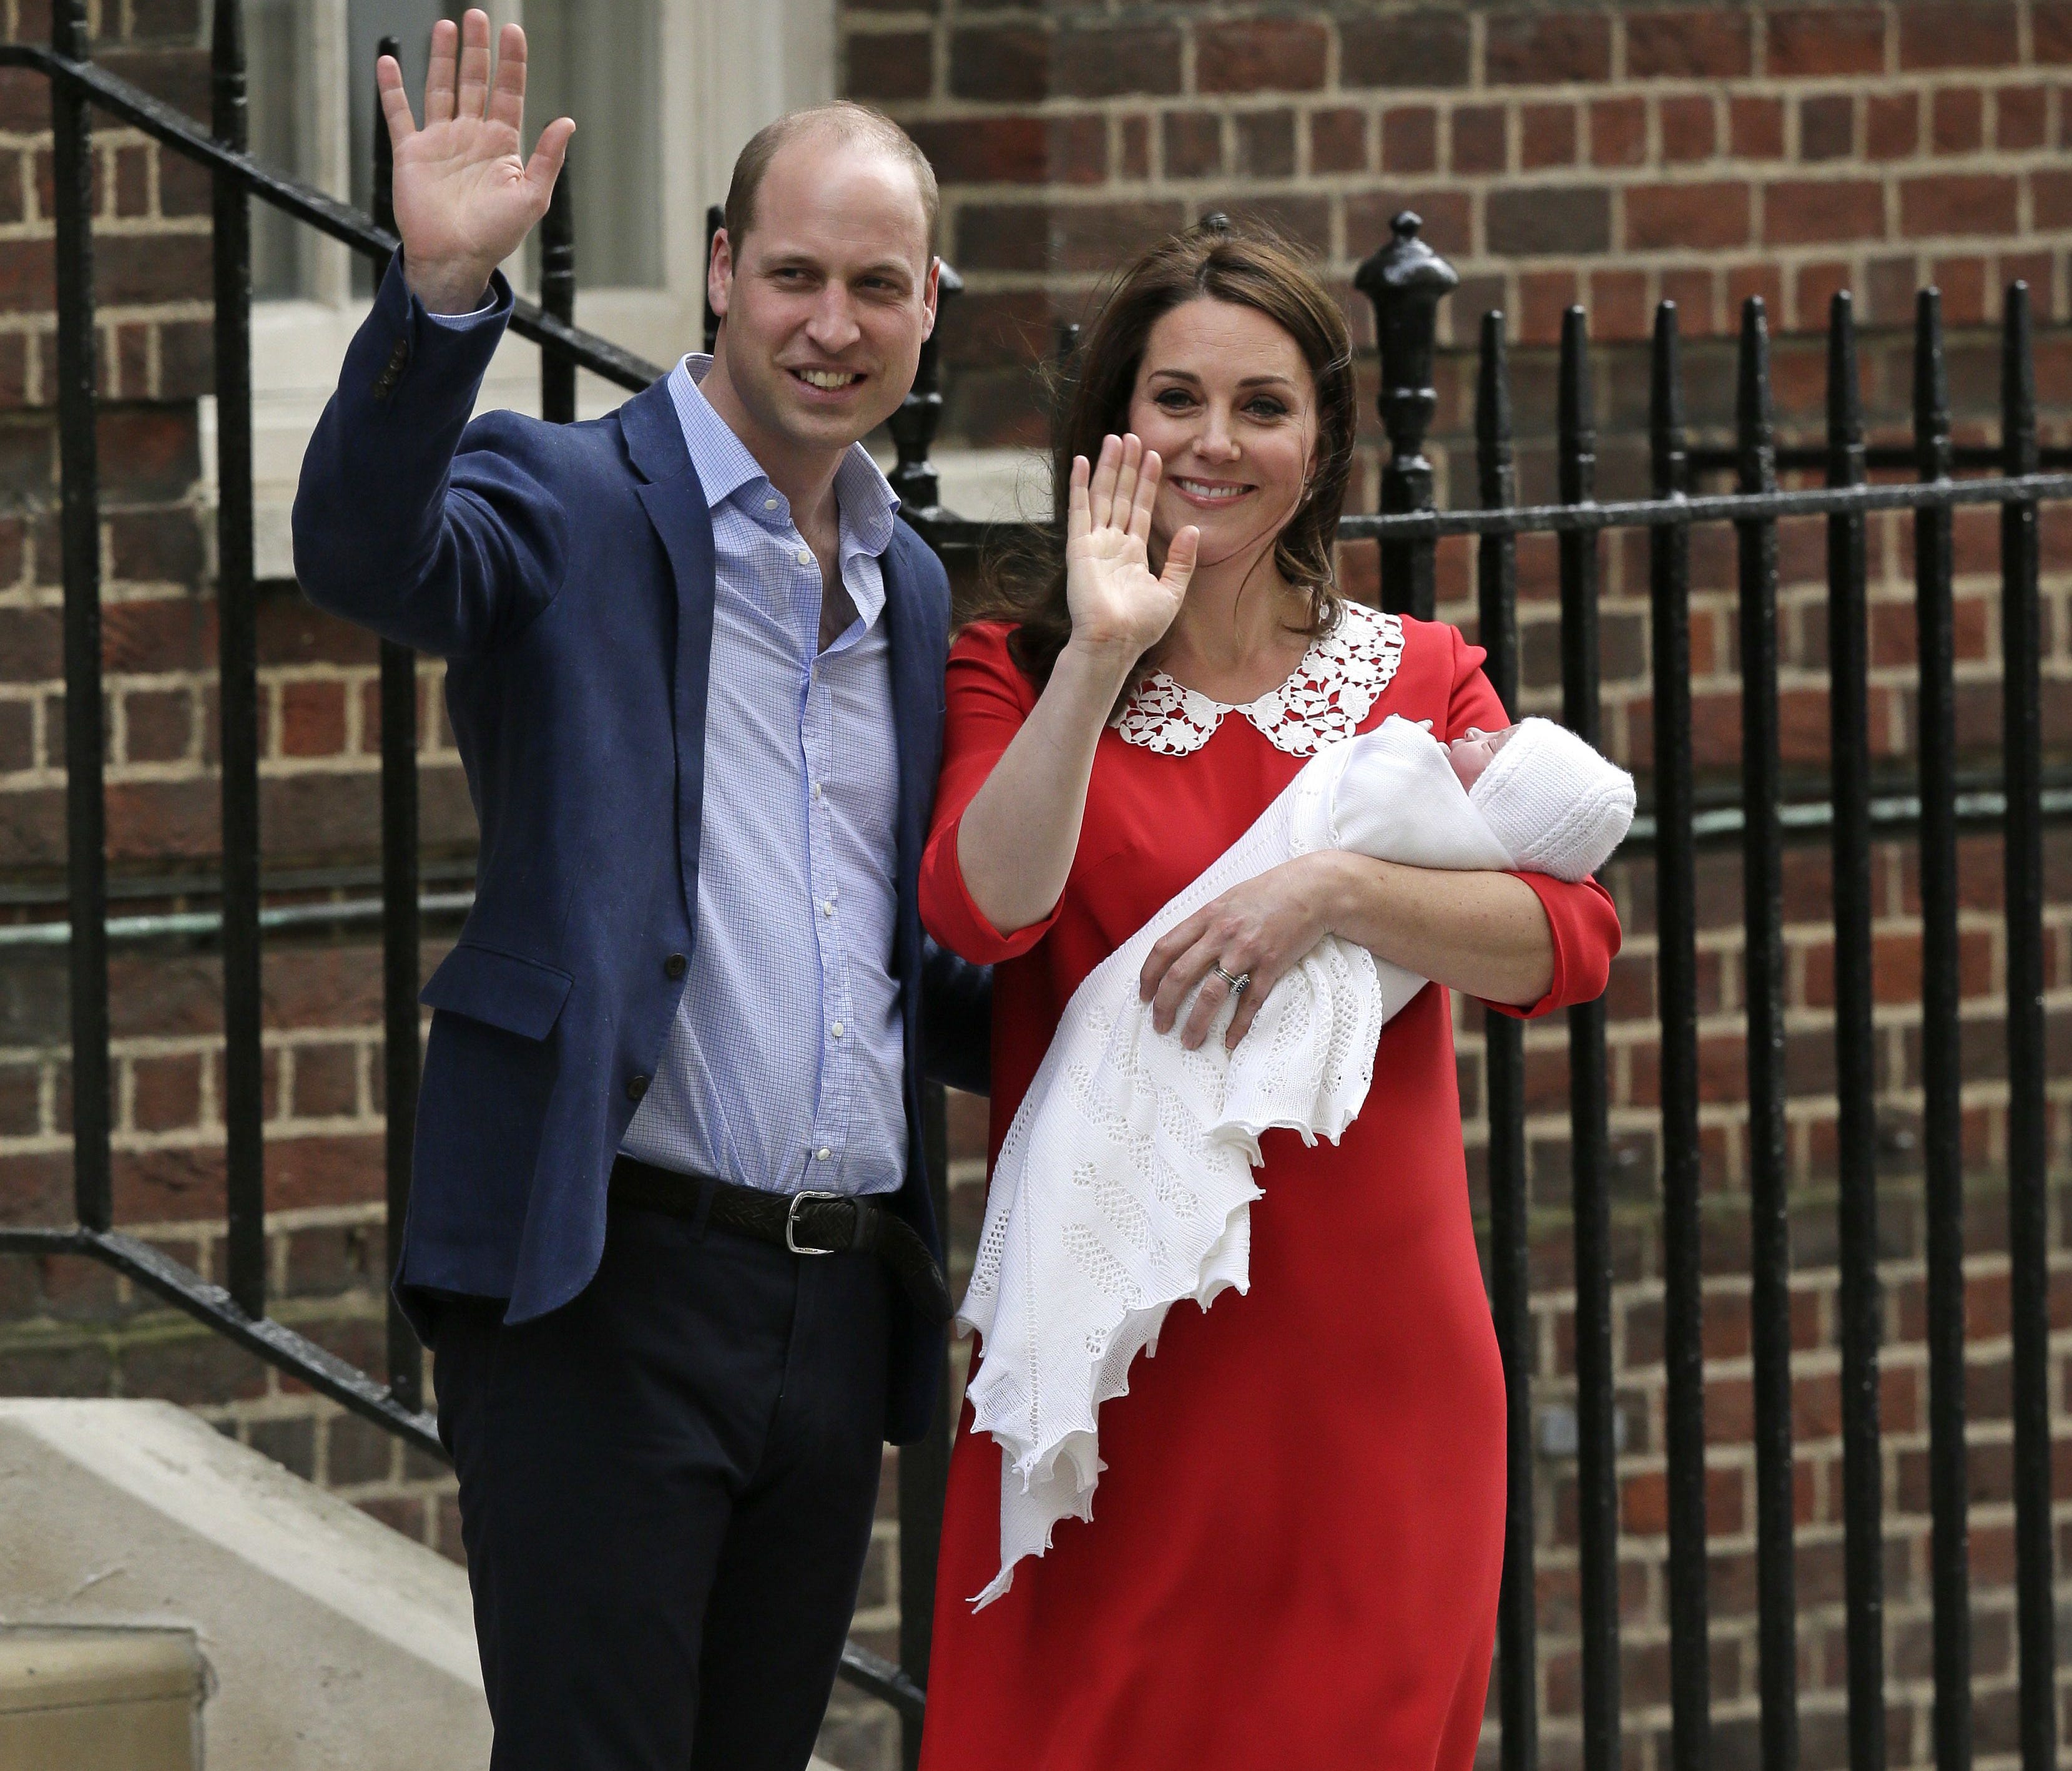 Prince William and Duchess Kate of Cambridge wave as leave hospital with their newborn son in London April 23, 2018.